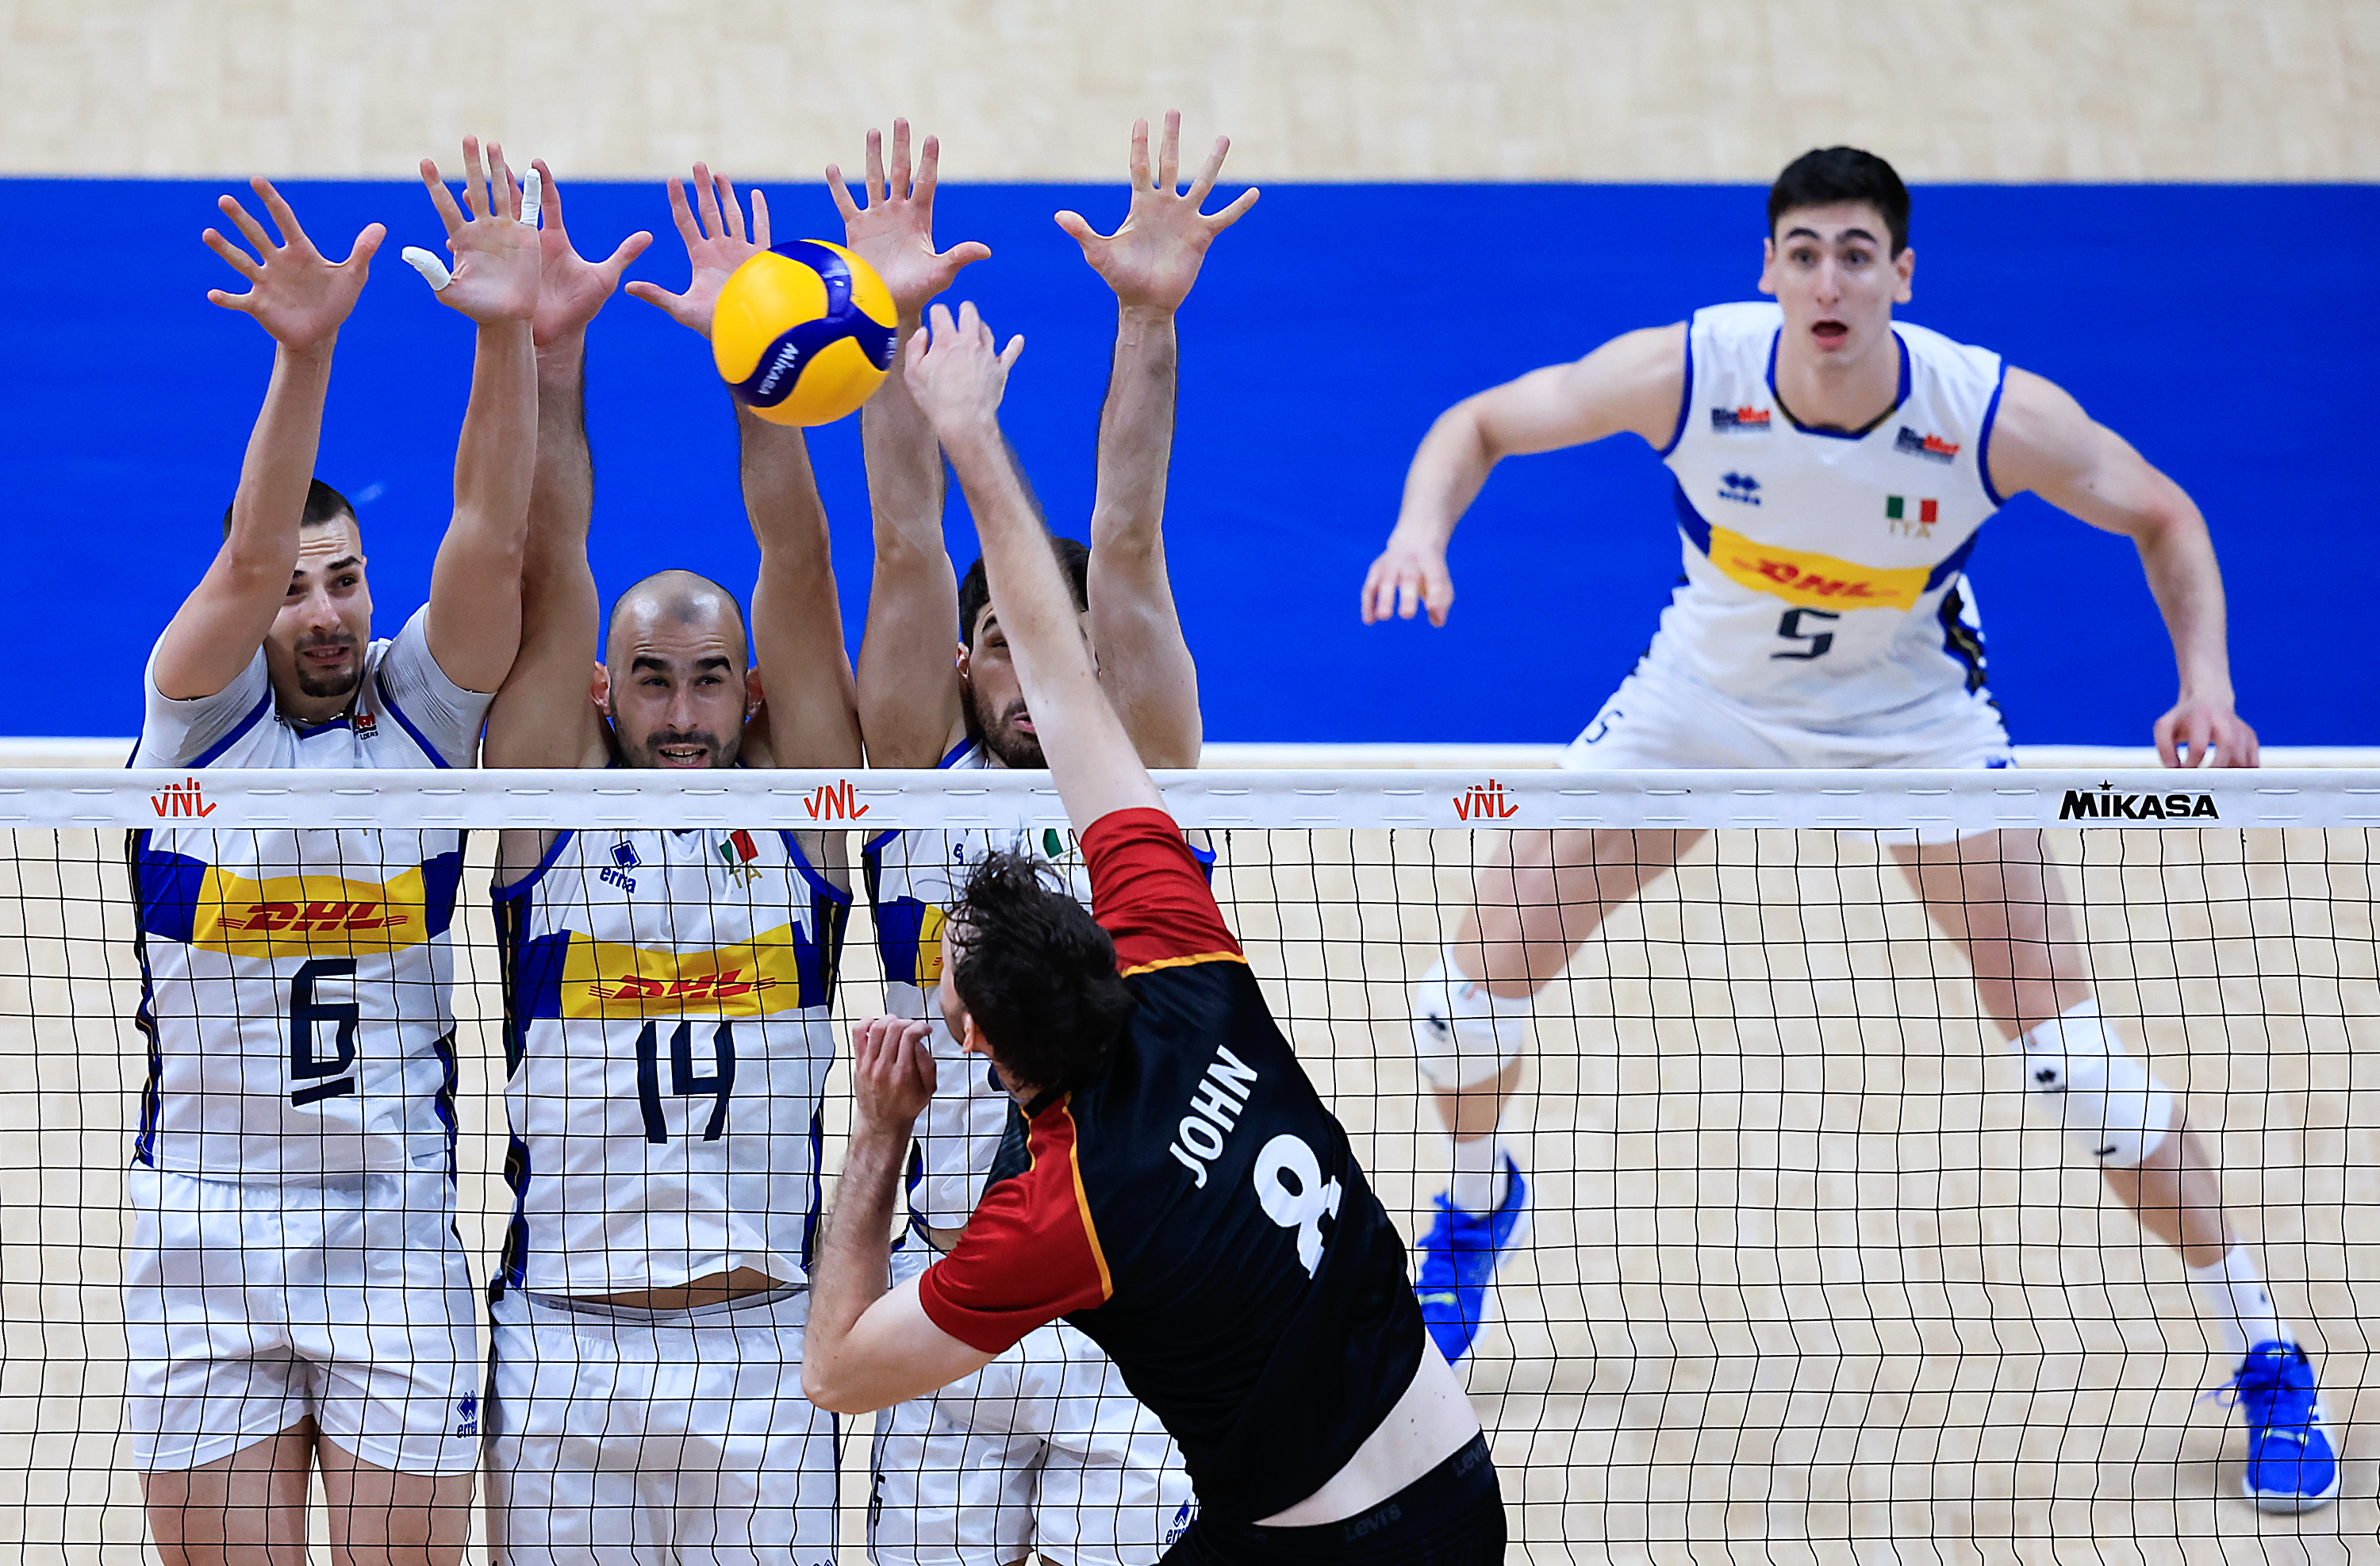 RIO DE JANEIRO, BRAZIL - MAY 22: Filip John of Germany jumps to spike the ball against Simone Giannelli, Gianluca Galassi and Daniele Lavia of Italy during a Pool 2 match between Germany and Italy as part of the Men's Volleyball Nations League at Maracanazinho on May 22, 2024 in Rio de Janeiro, Brazil.  (Photo by Buda Mendes/Getty Images)